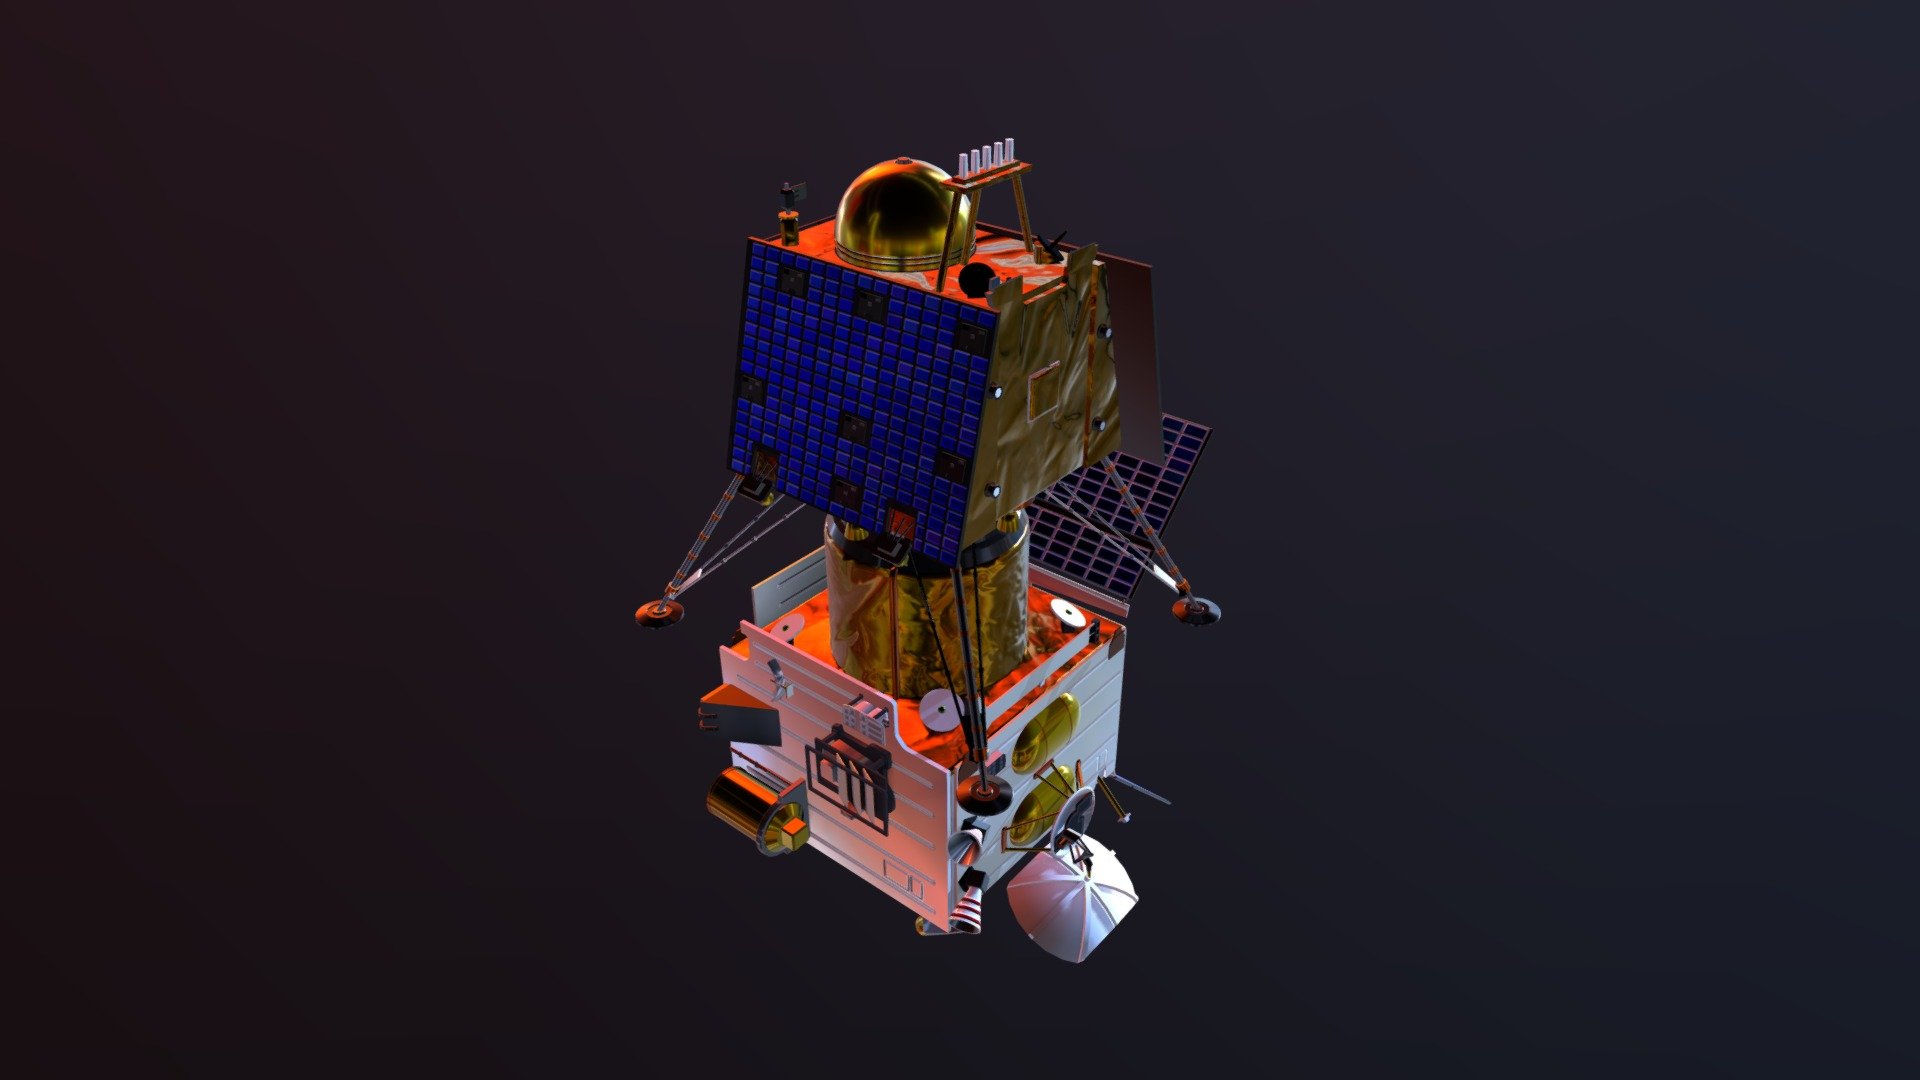 Chandrayaan-2 is India's second lunar exploration mission after Chandrayaan-1. 

Developed by the Indian Space Research Organisation (ISRO), the mission was launched from the second launch pad at Satish Dhawan Space Centre on 22 July 2019 at 2.43 PM IST (09:13 UTC) to the Moon by a Geosynchronous Satellite Launch Vehicle Mark III (GSLV Mk III).

It consists of a lunar orbiter, a lander, and a lunar rover named Pragyan, all of which were developed in India. The main scientific objective is to map the location and abundance of lunar water 3d model